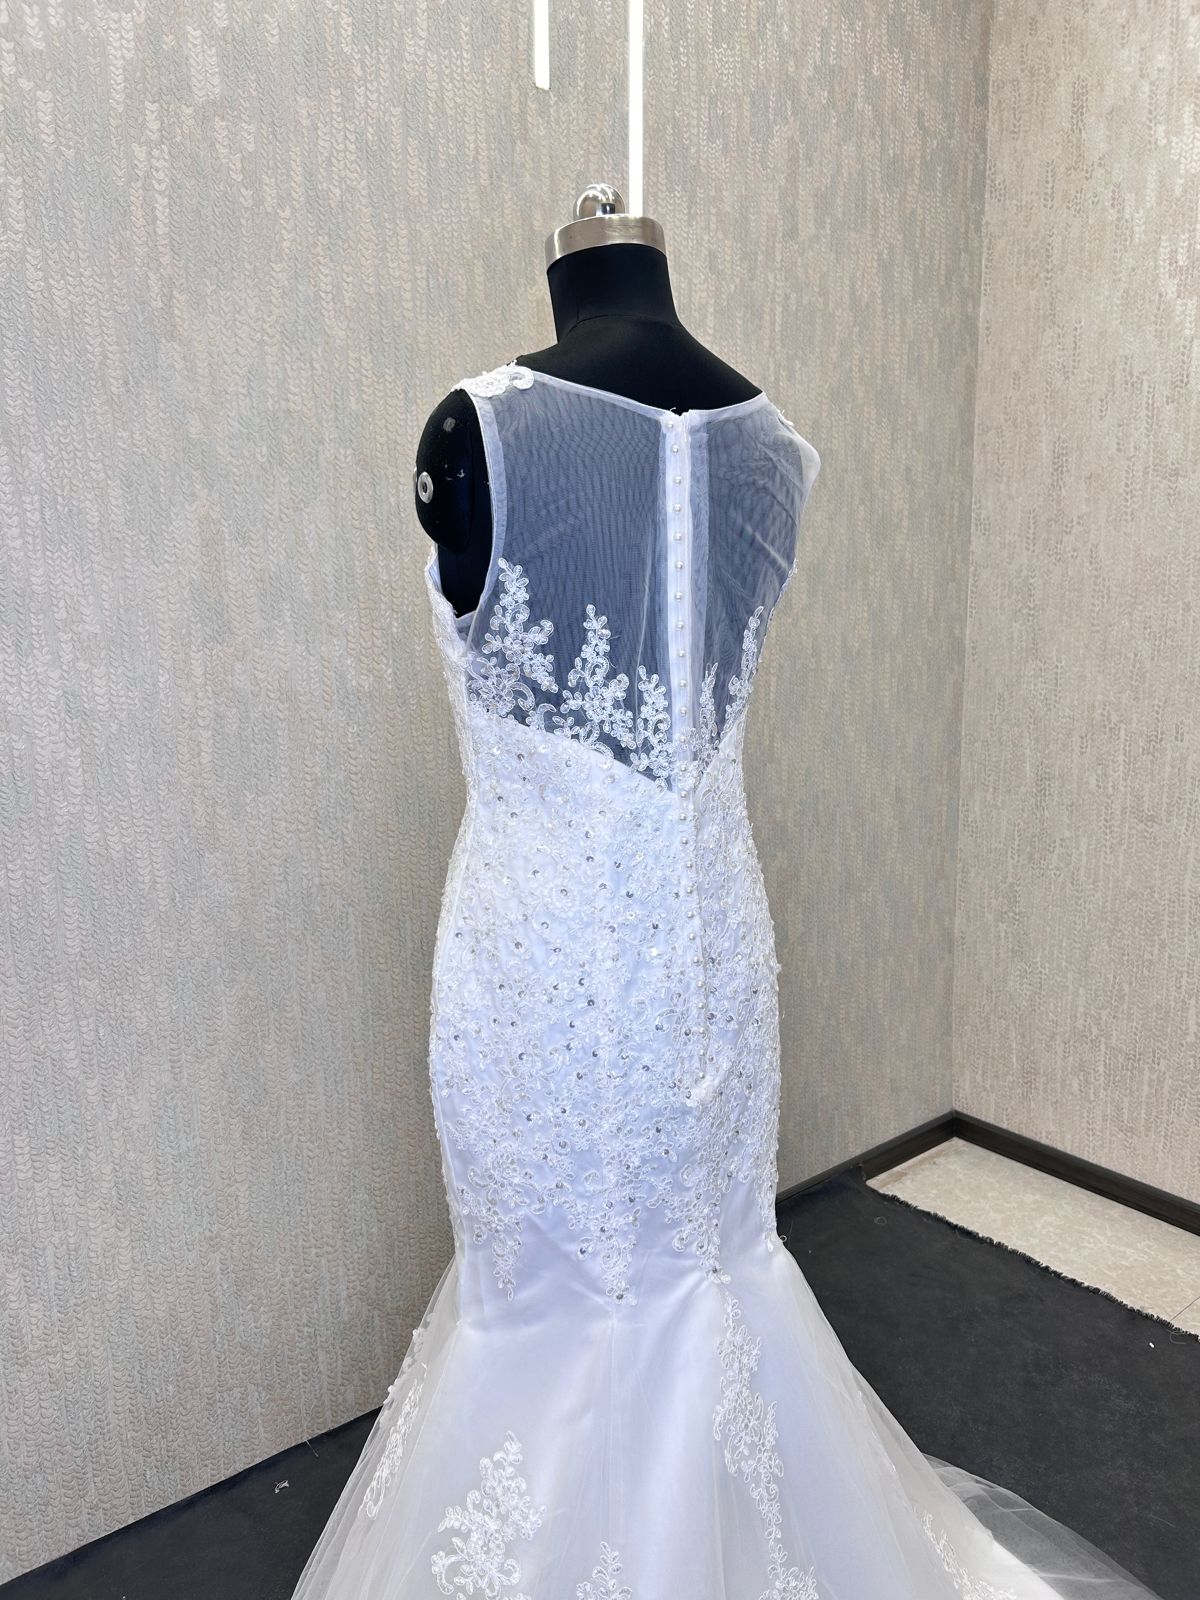 GownLink Bridal Mermaid Gown GLD290 With Sleeves For Christian & Catholic Wedding